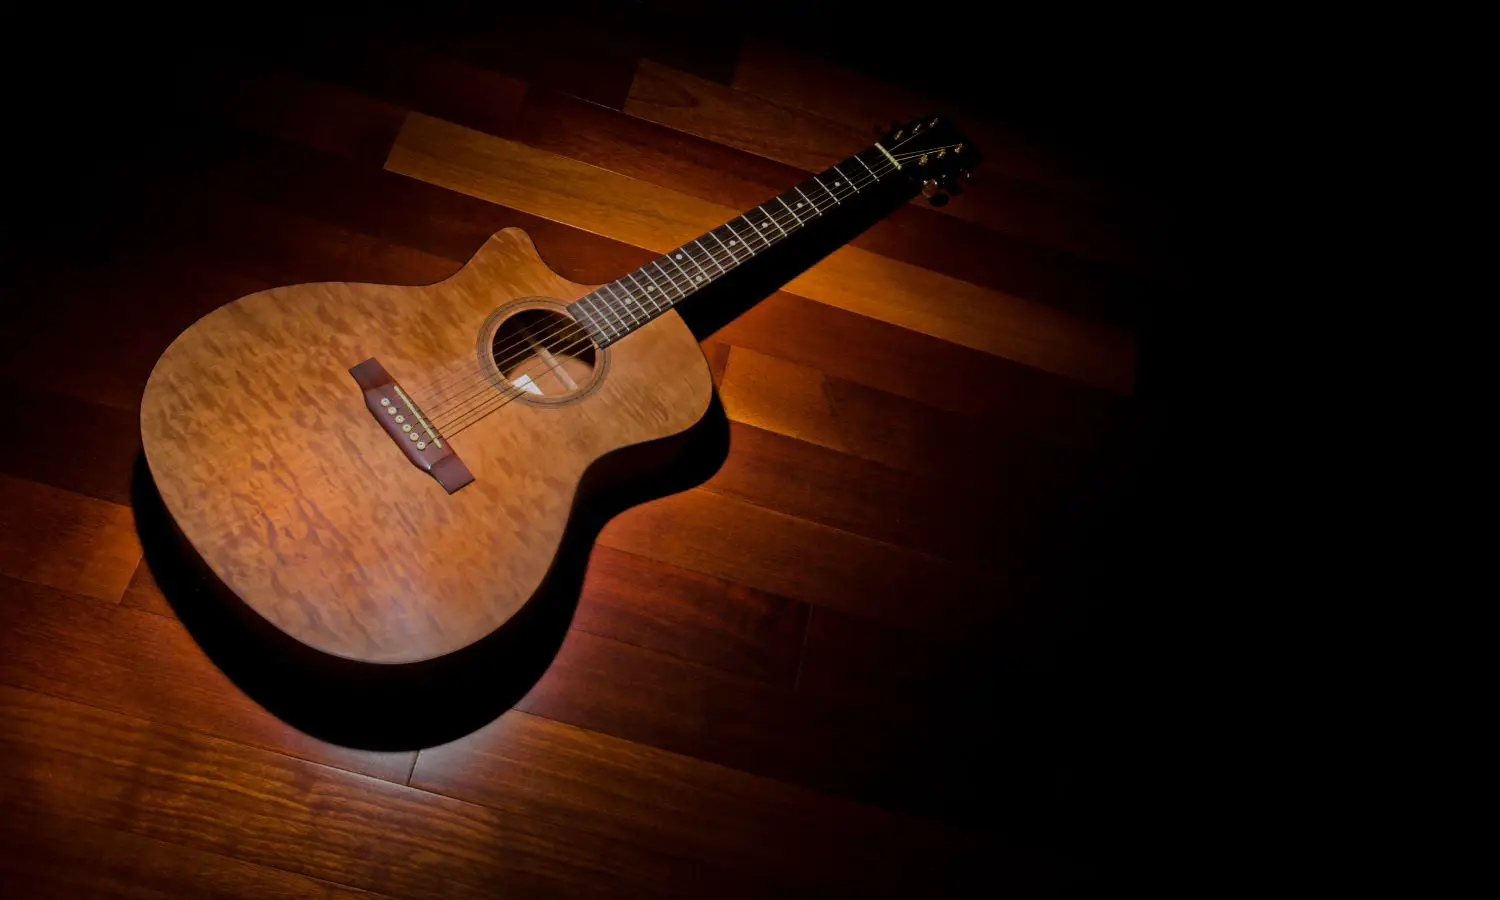 Alder Vs Mahogany Body: What’s Better? (Sound, Weight & Cost)